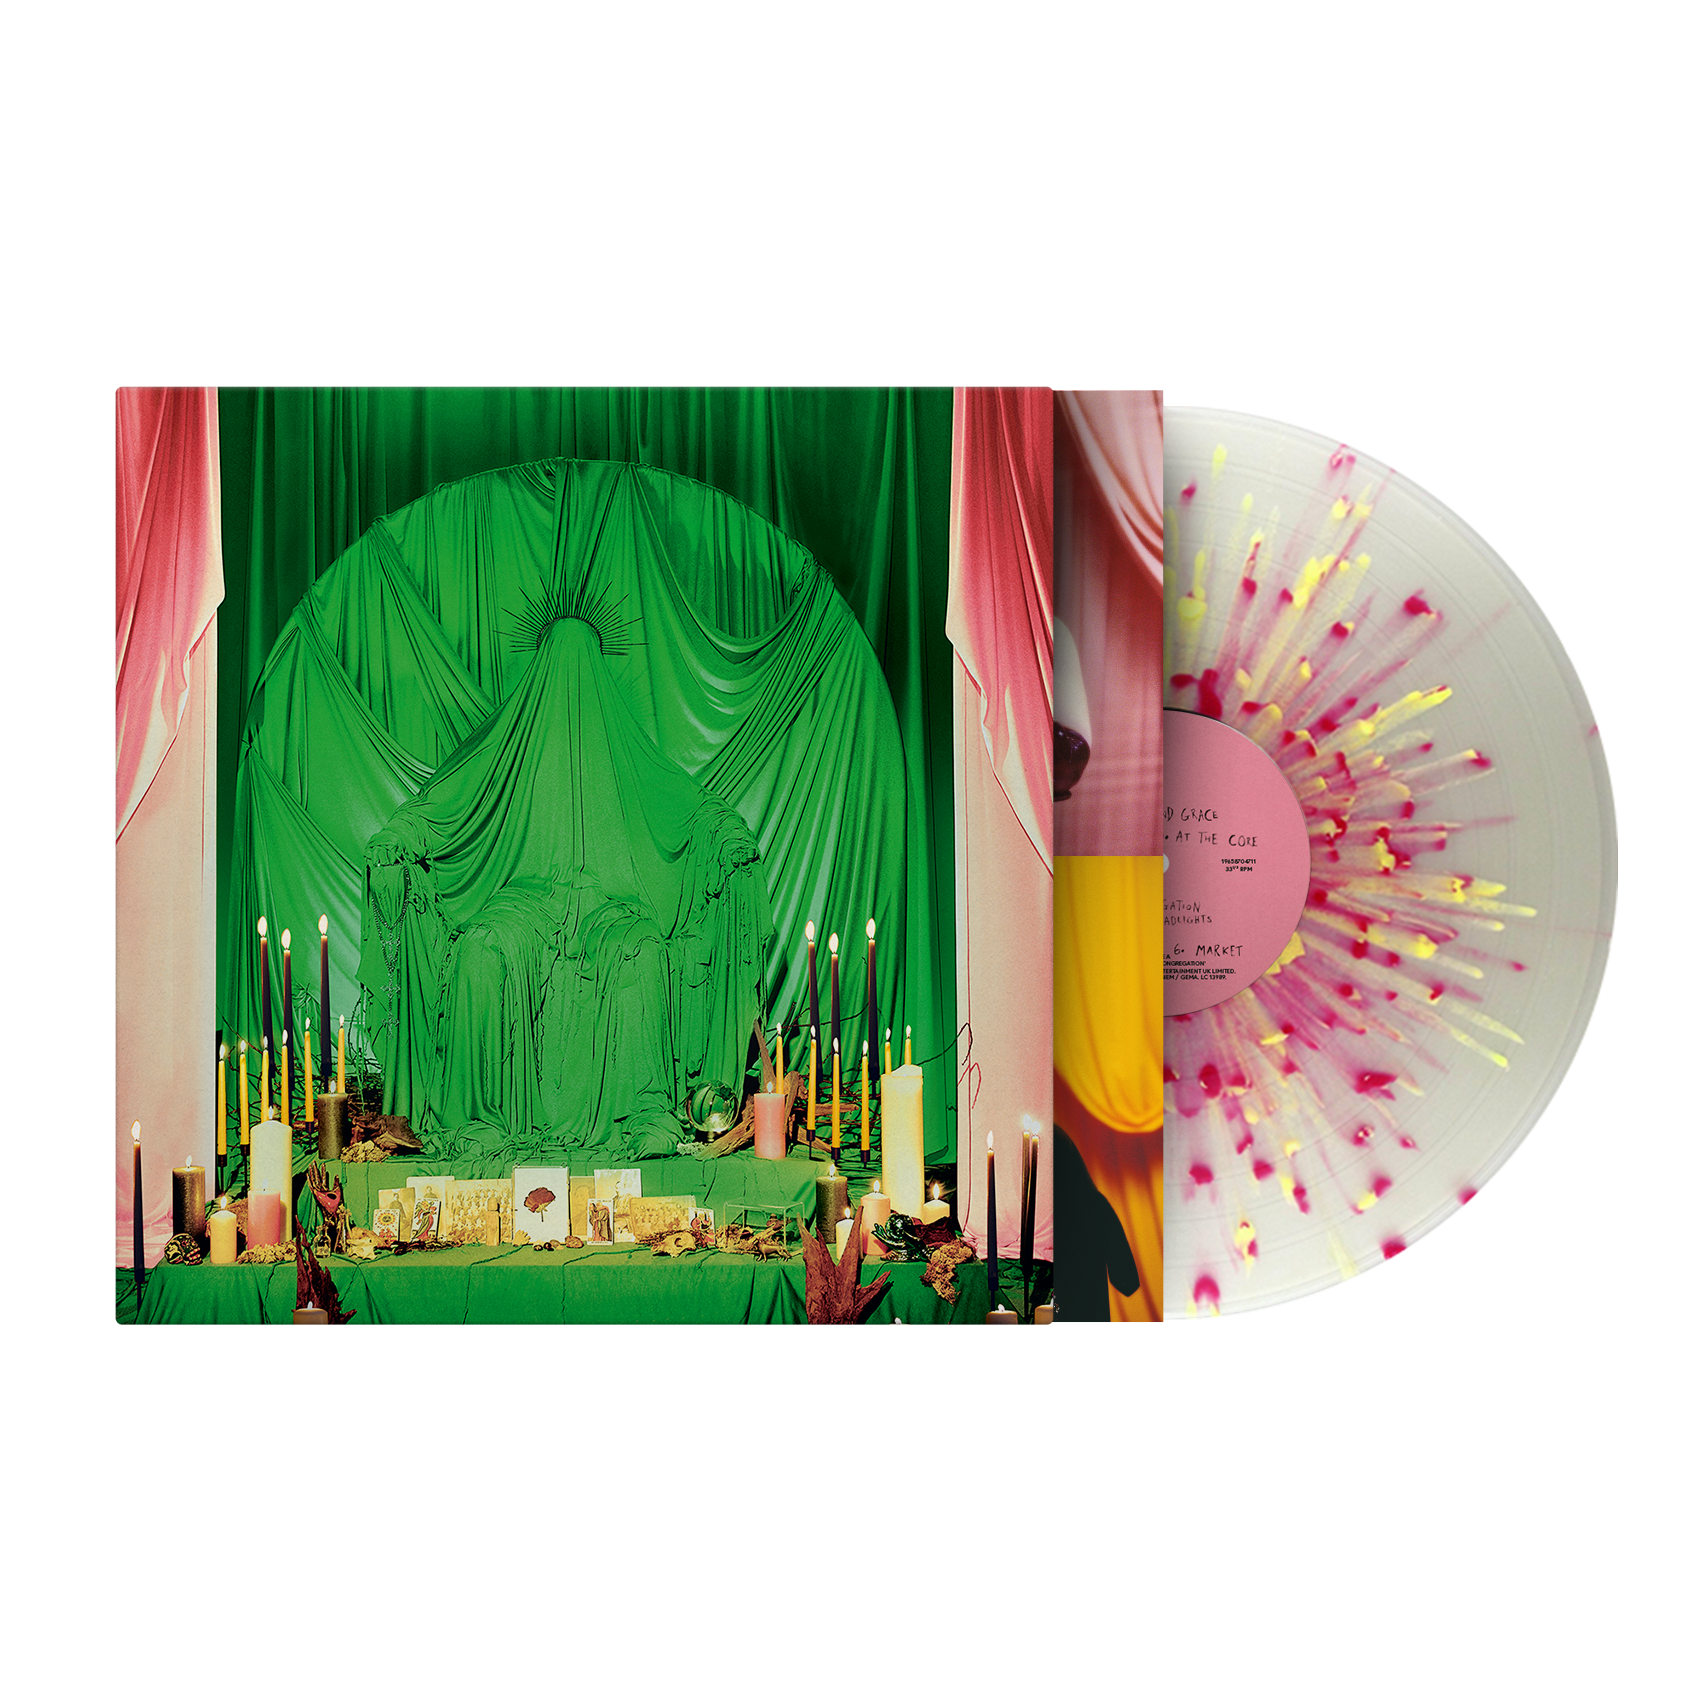 Witch Fever - Congregation (Retail Exclusive Pink & Yellow Splatter Vinyl)